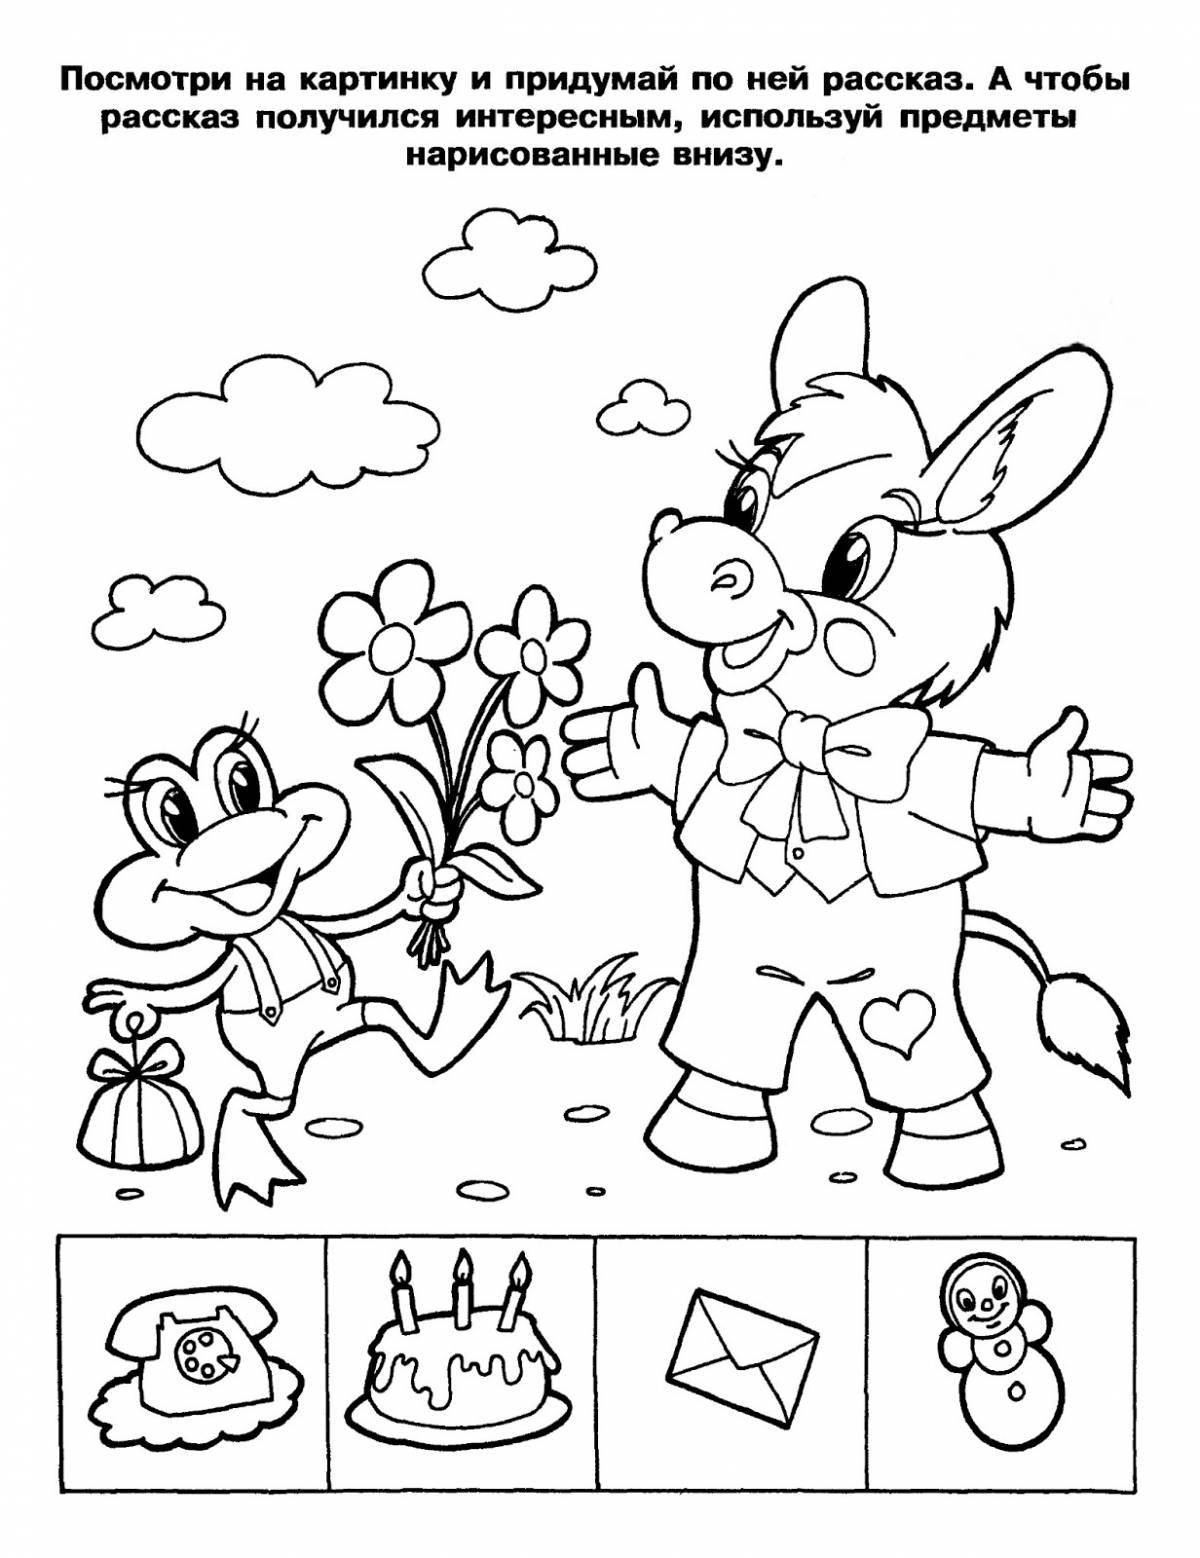 A fascinating coloring book with tasks for children 5-6 years old